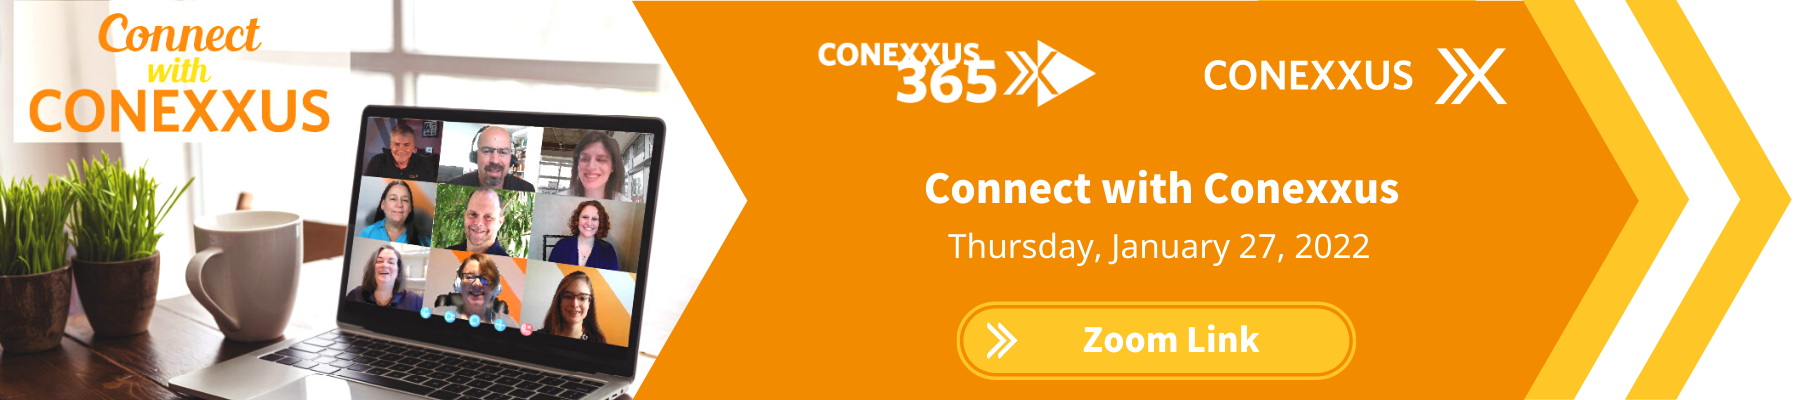 Connect with Conexxus